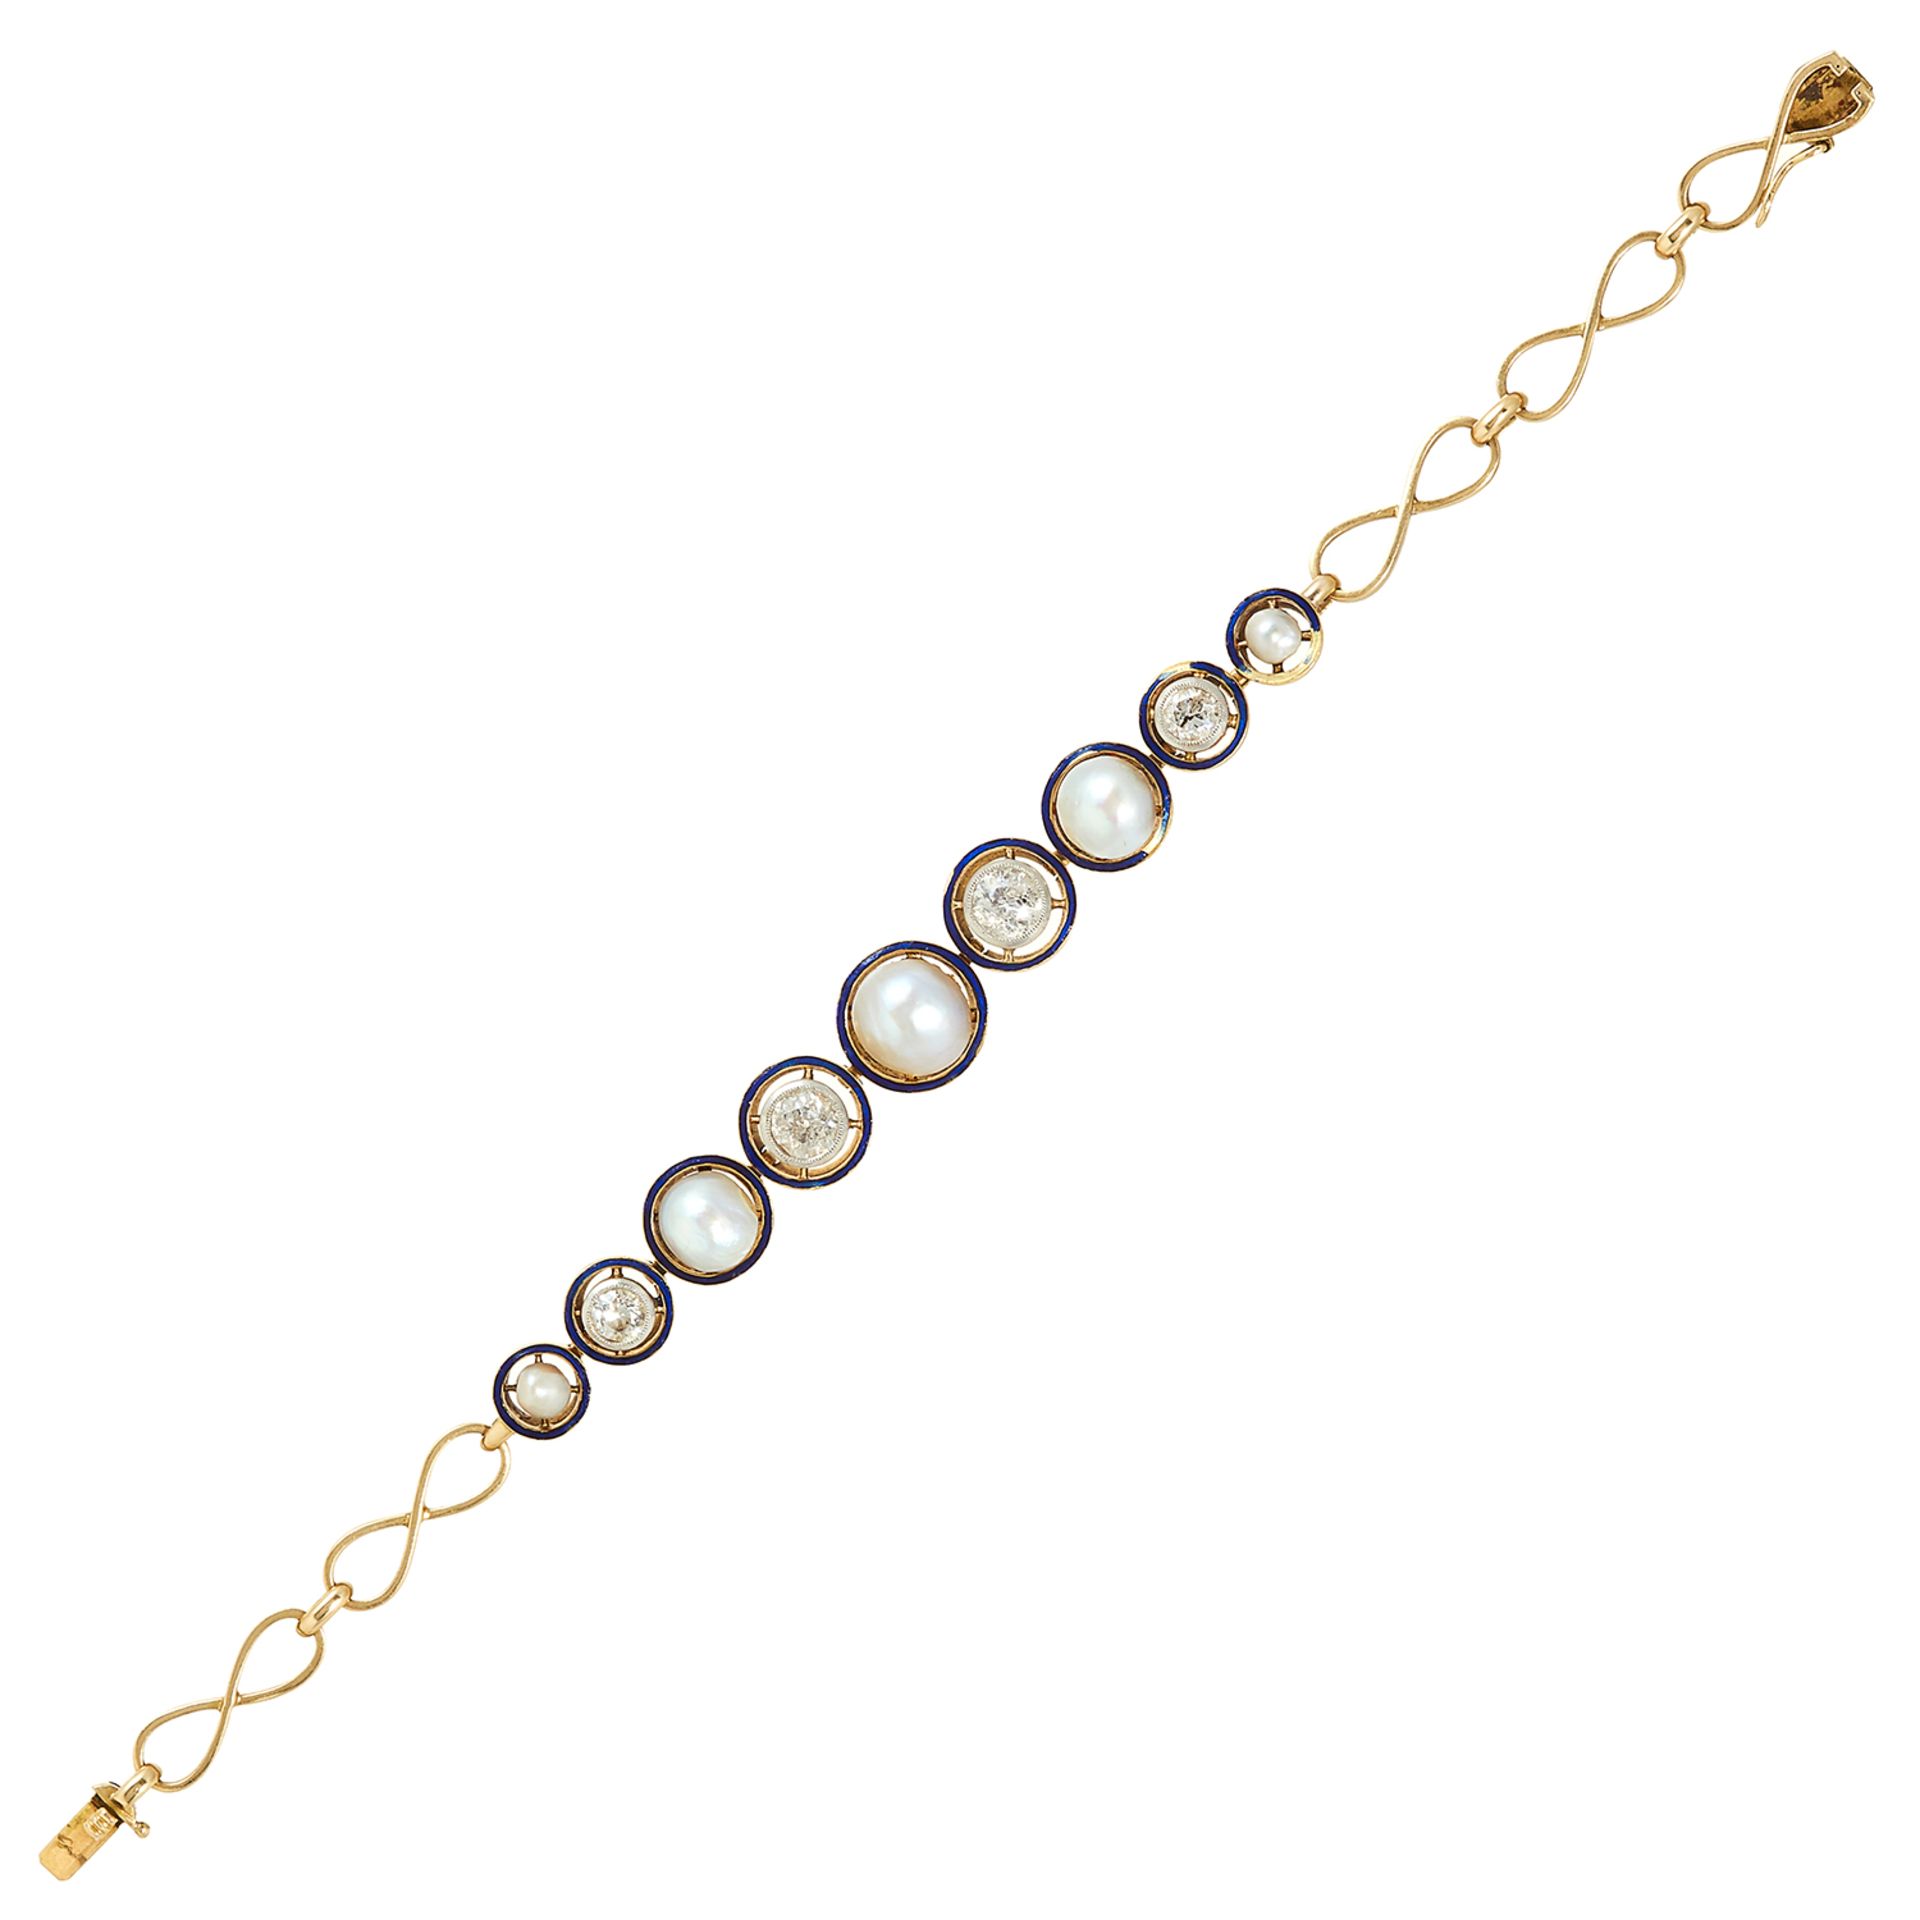 AN ART DECO NATURAL PEARL, DIAMOND AND ENAMEL BRACELET in high carat yellow gold, comprising a row